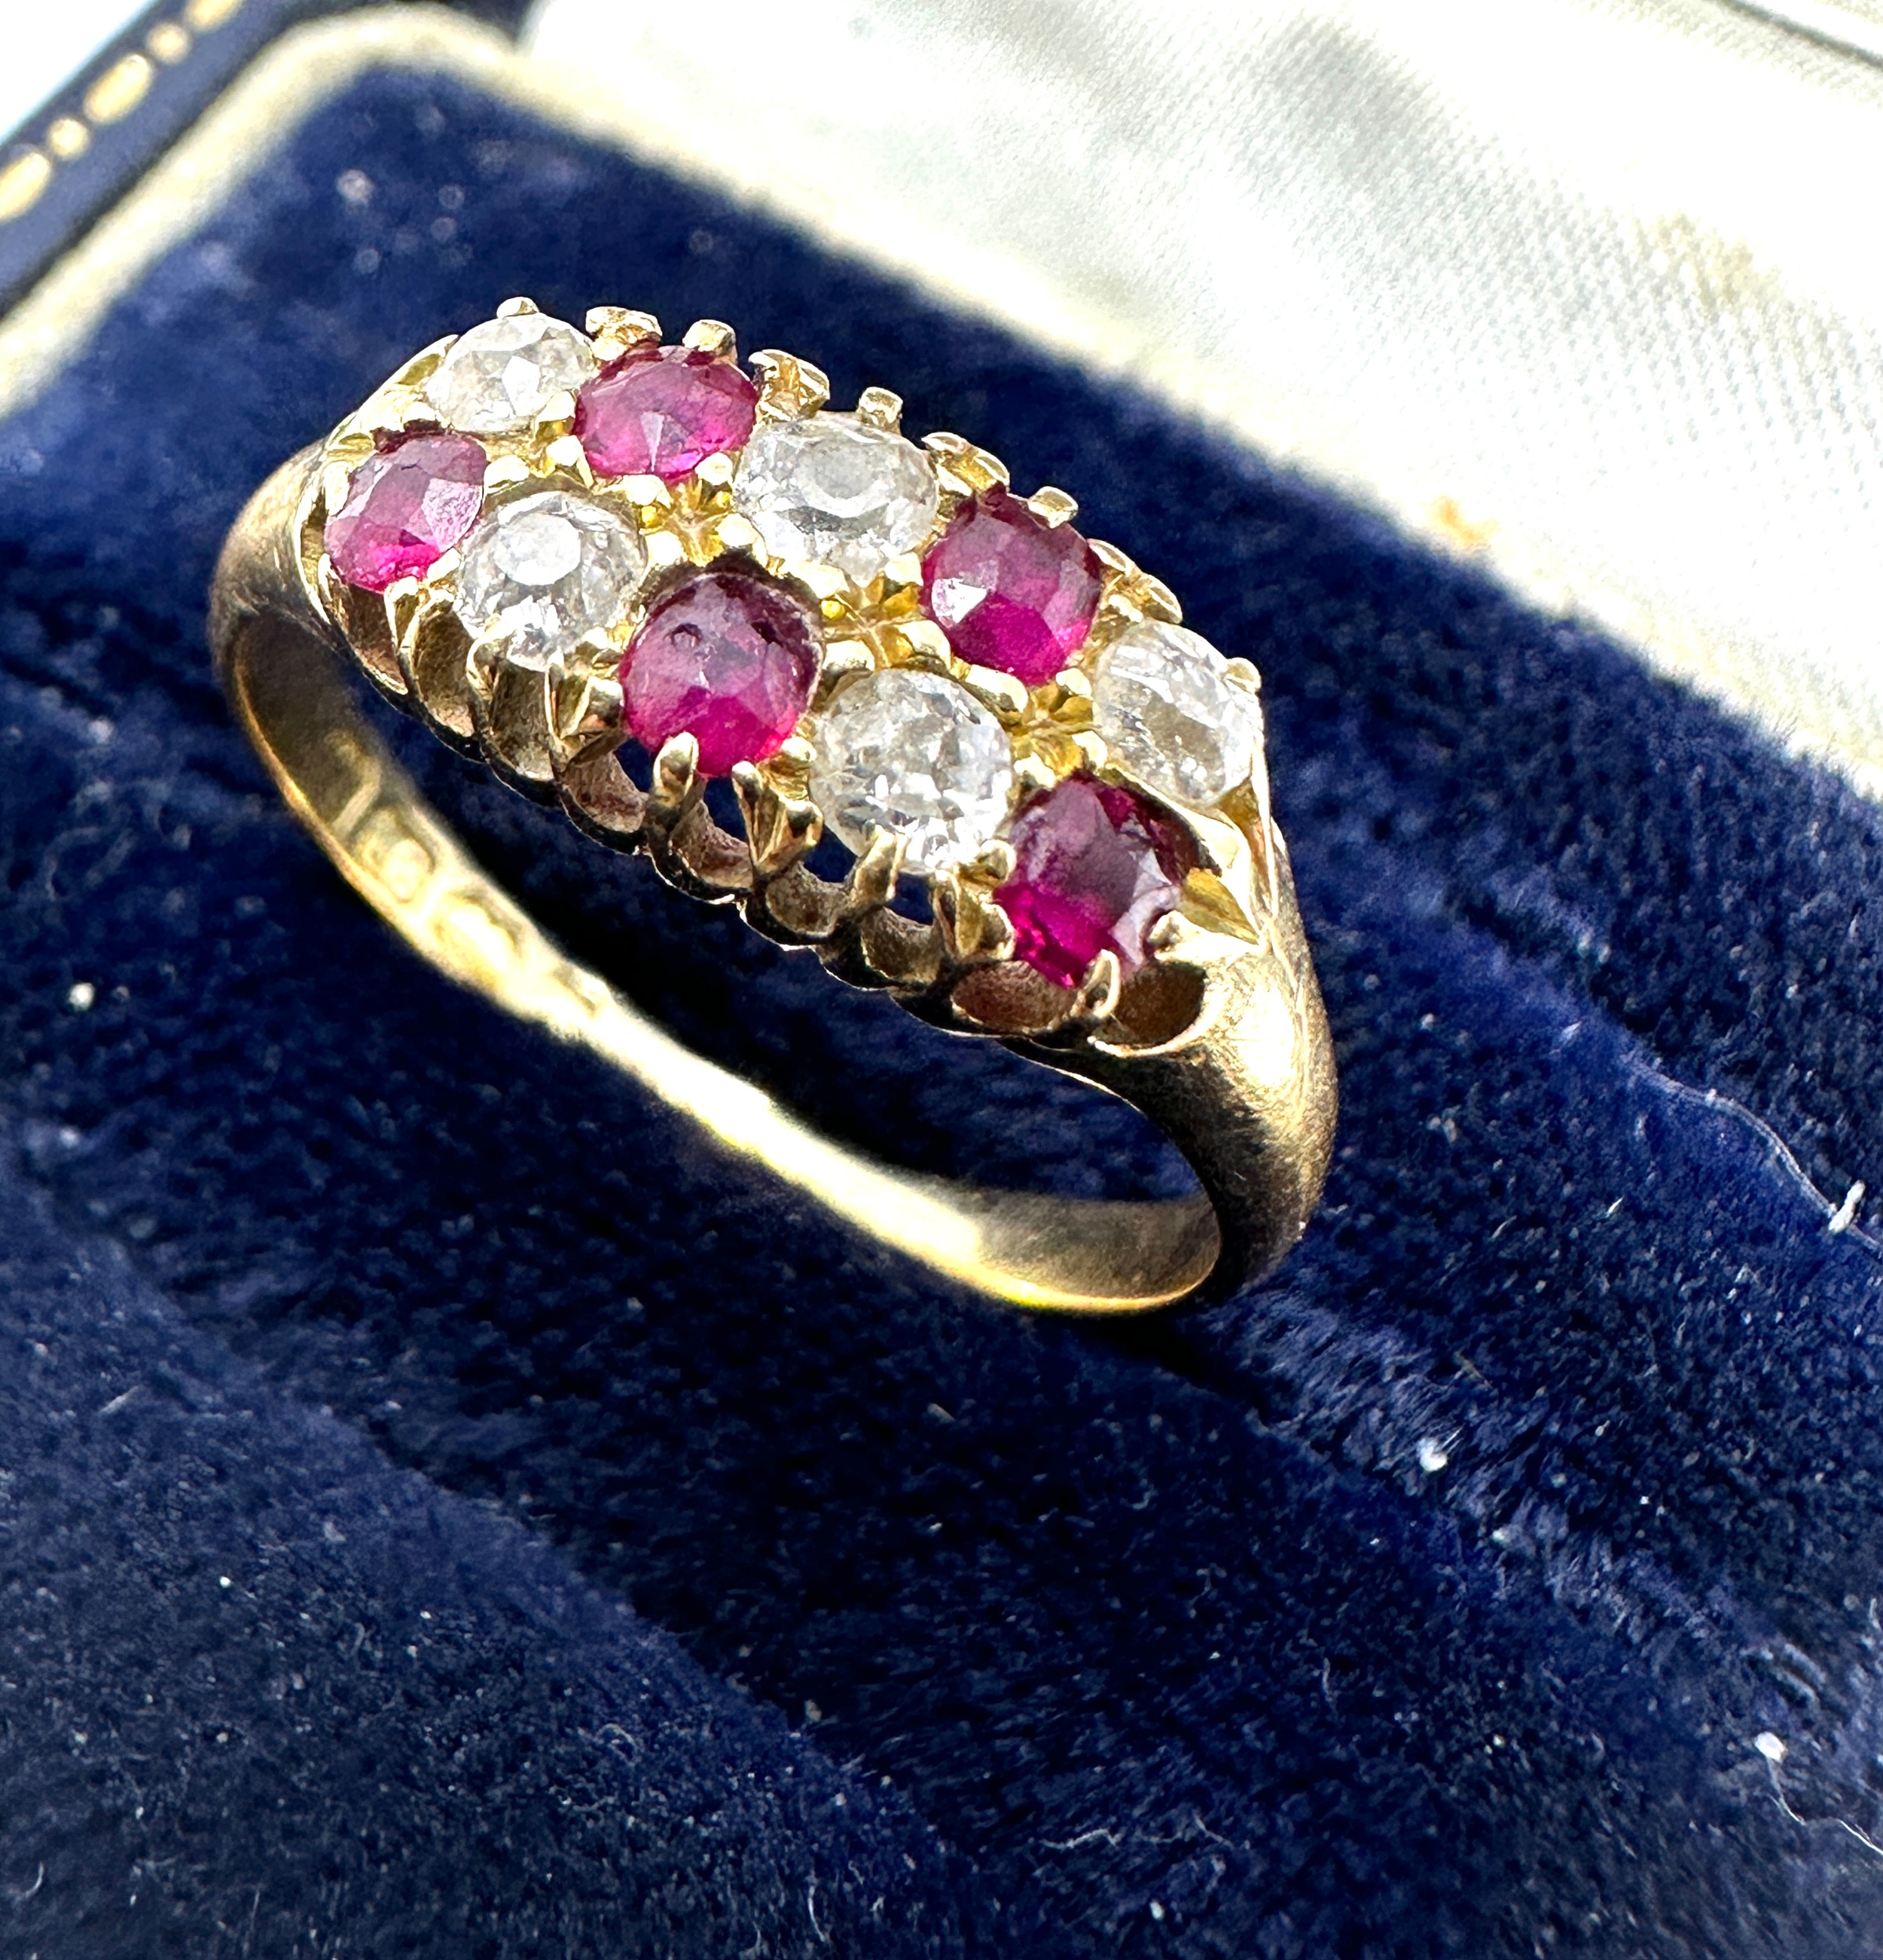 antique 18ct gold diamond & ruby ring weight 3g - Image 3 of 4